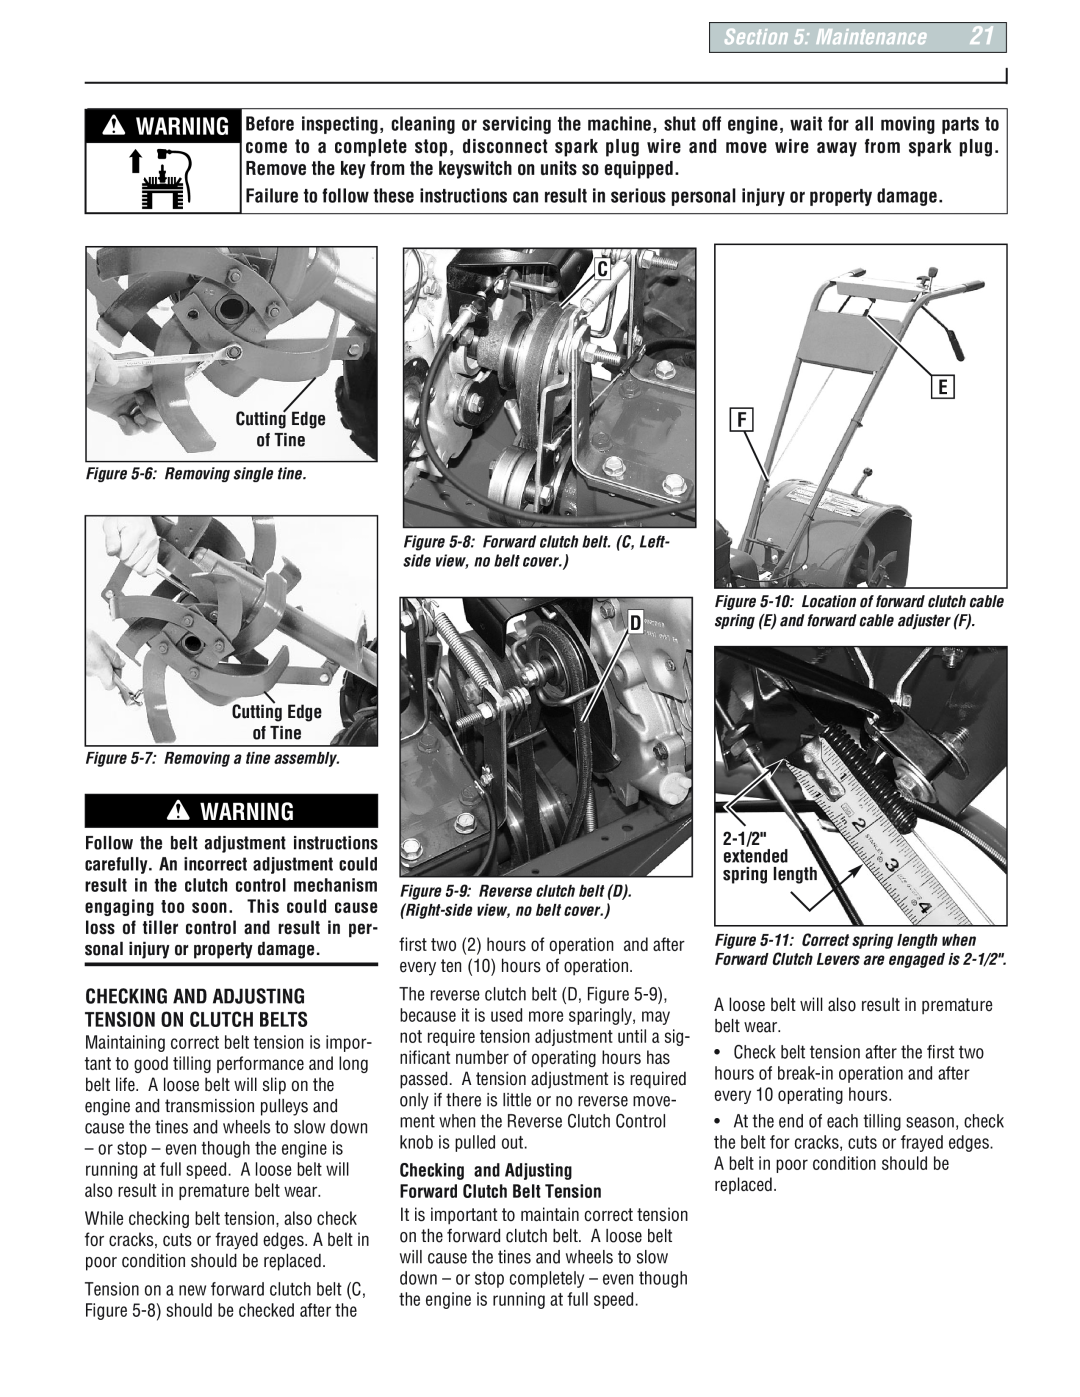 Troy-Bilt 665B Pro-line, 664Dpony Cutting Edge of Tine, Checking and Adjusting Forward Clutch Belt Tension, Maintenance 